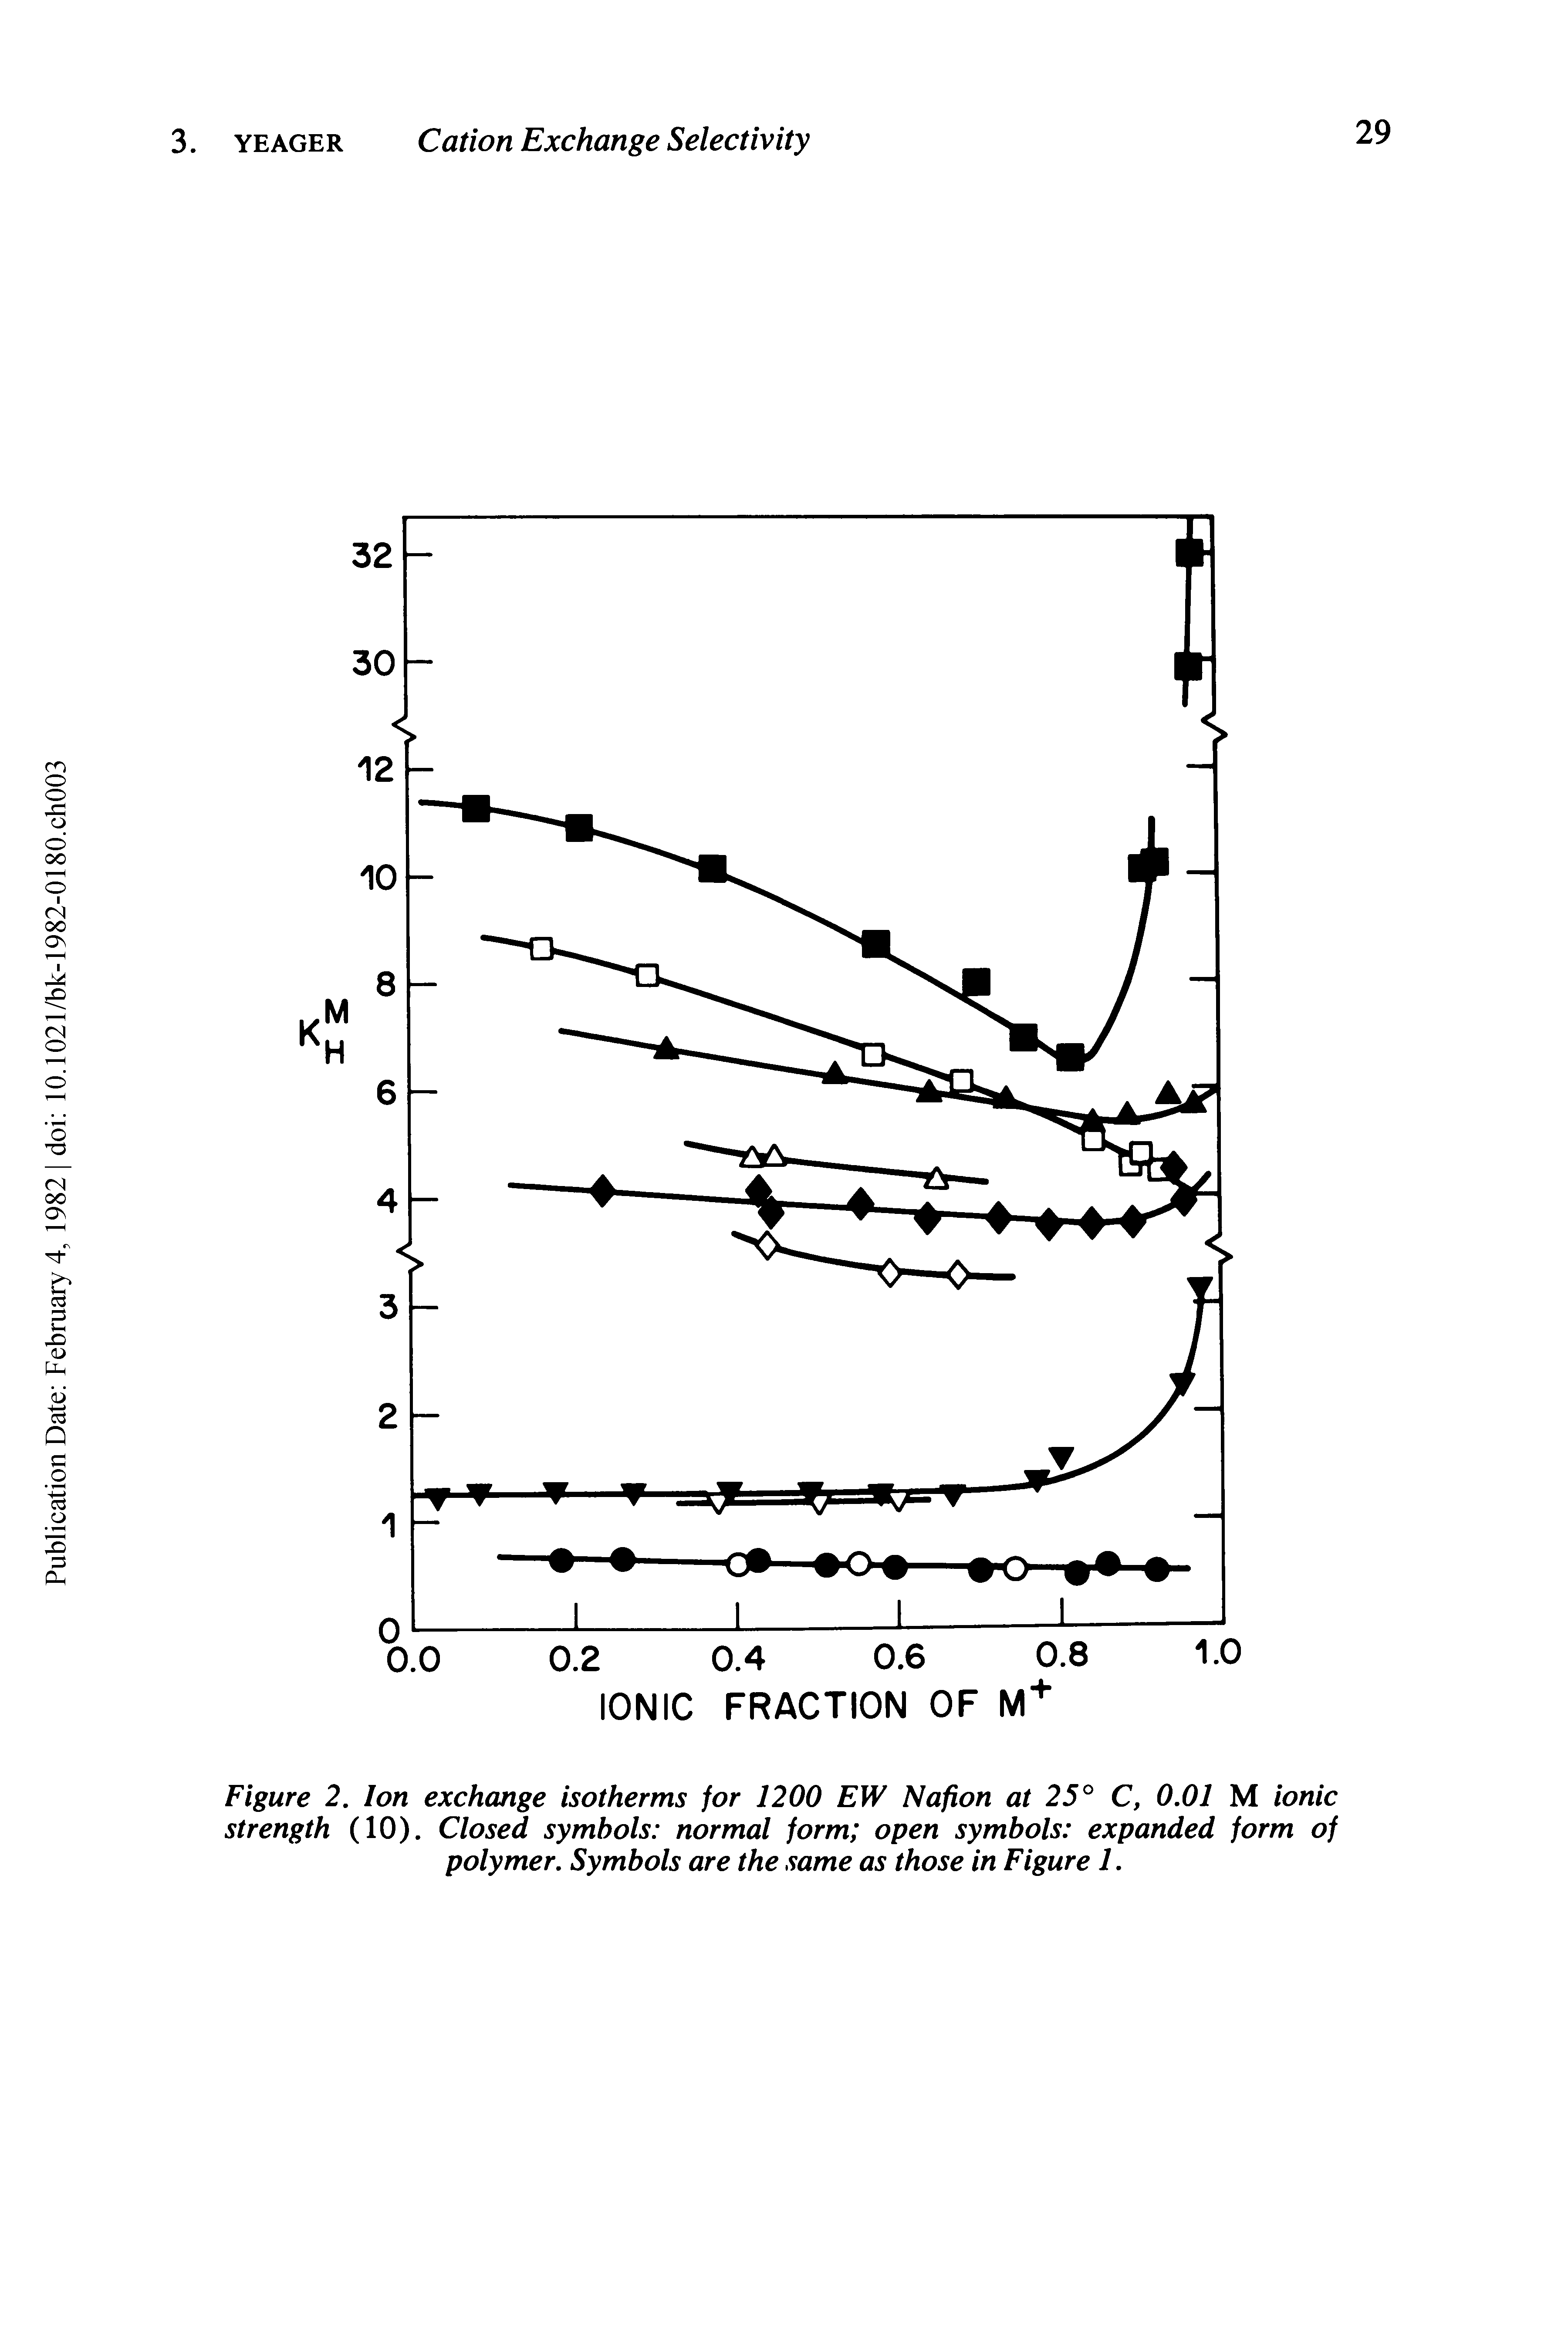 Figure 2. Ion exchange isotherms for 1200 EW Nafion at 25° C, 0.01 M ionic strength (10). Closed symbols normal form open symbols expanded form of polymer. Symbols are the same as those in Figure 1.